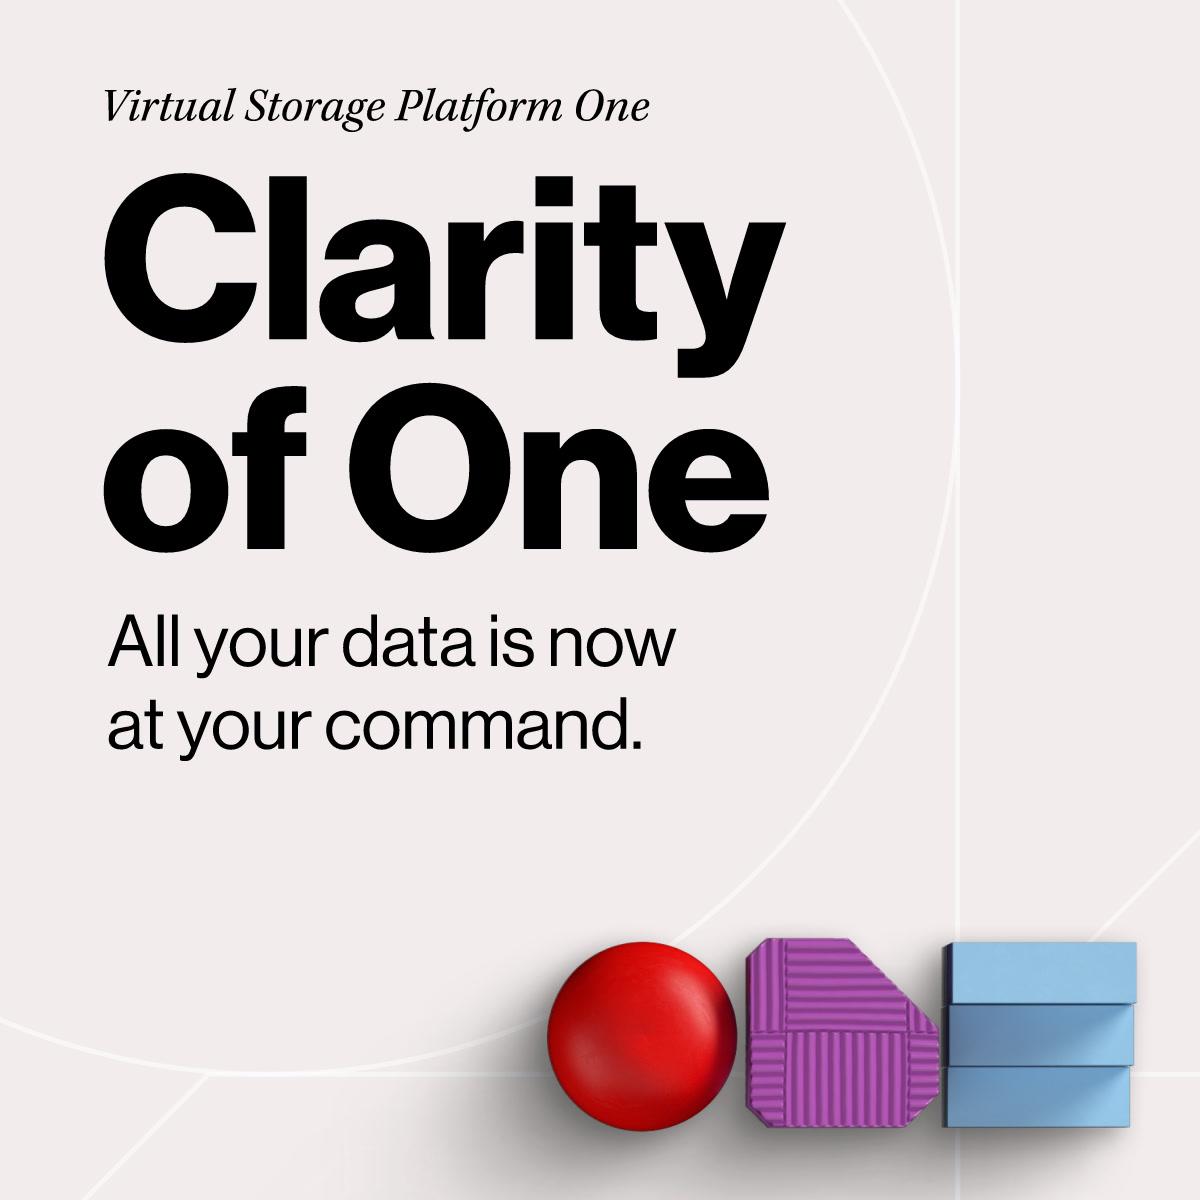 #HybridCloud clarity is in reach. Discover how Hitachi Virtual Storage Platform One clears data silos to unlock holistic business insights and drive innovation with one data platform: ow.ly/FEo430sBThO #VSPOne